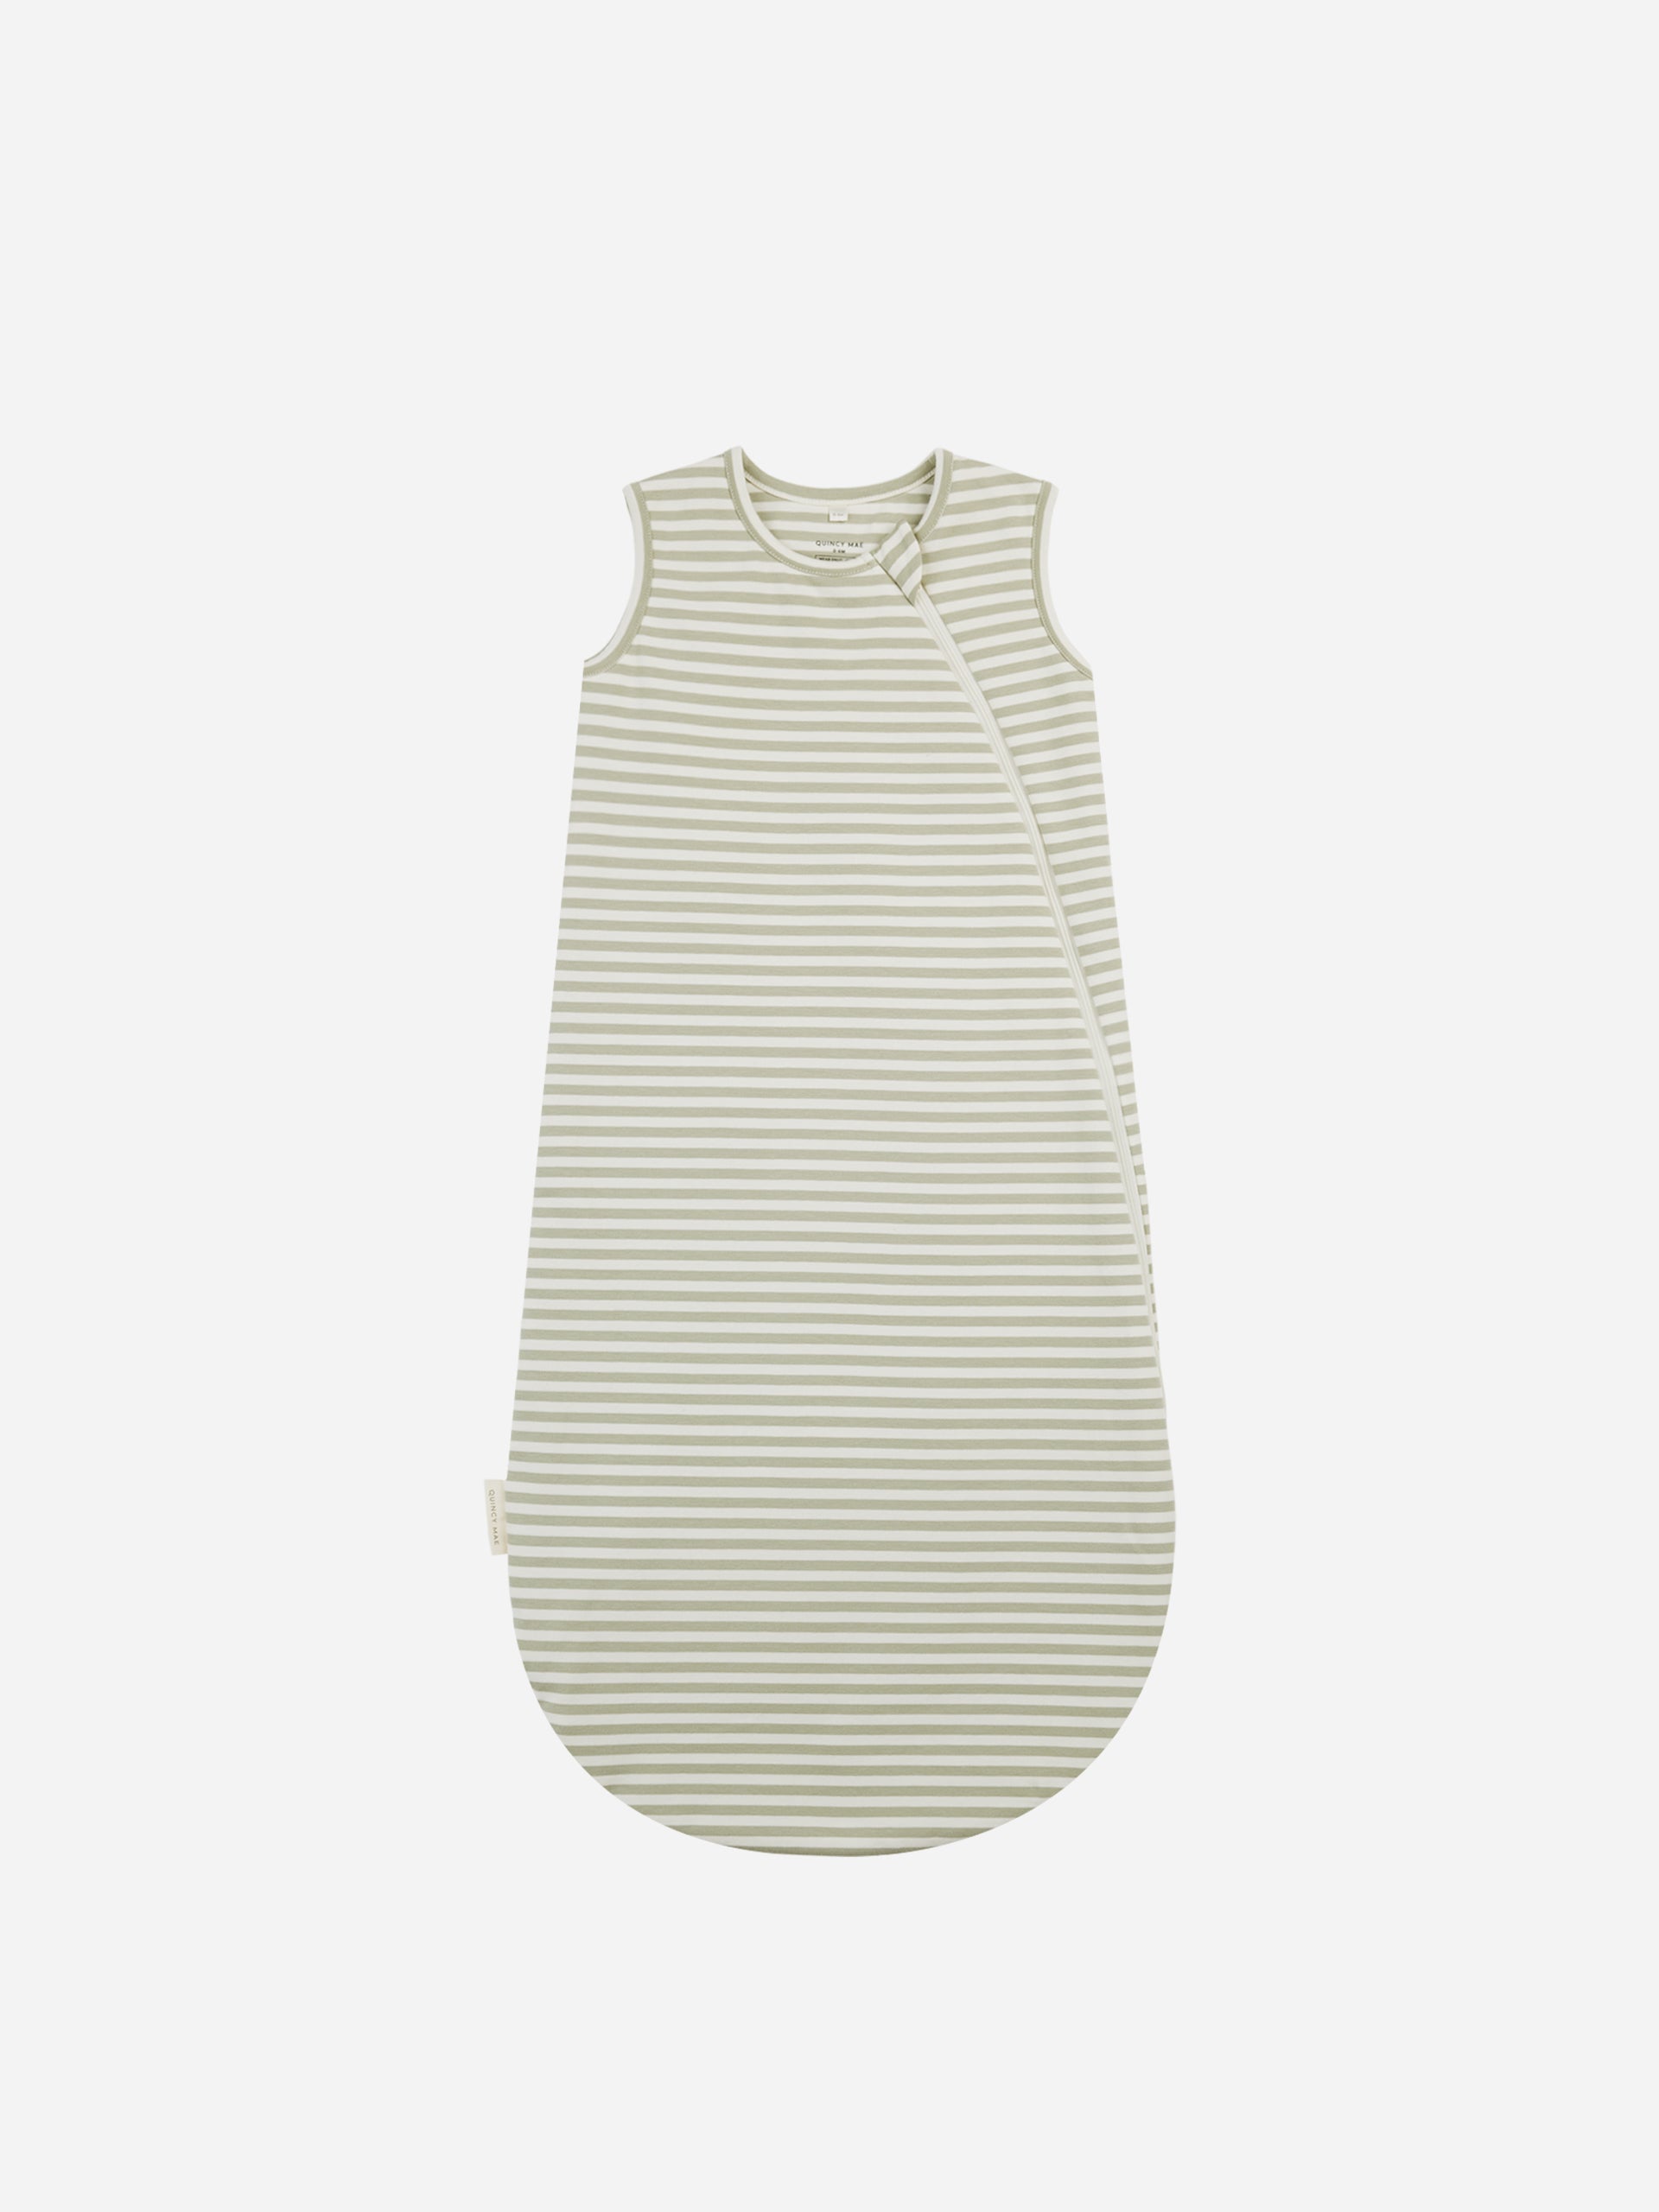 Jersey Sleep Bag || Sage Stripe - Rylee + Cru | Kids Clothes | Trendy Baby Clothes | Modern Infant Outfits |